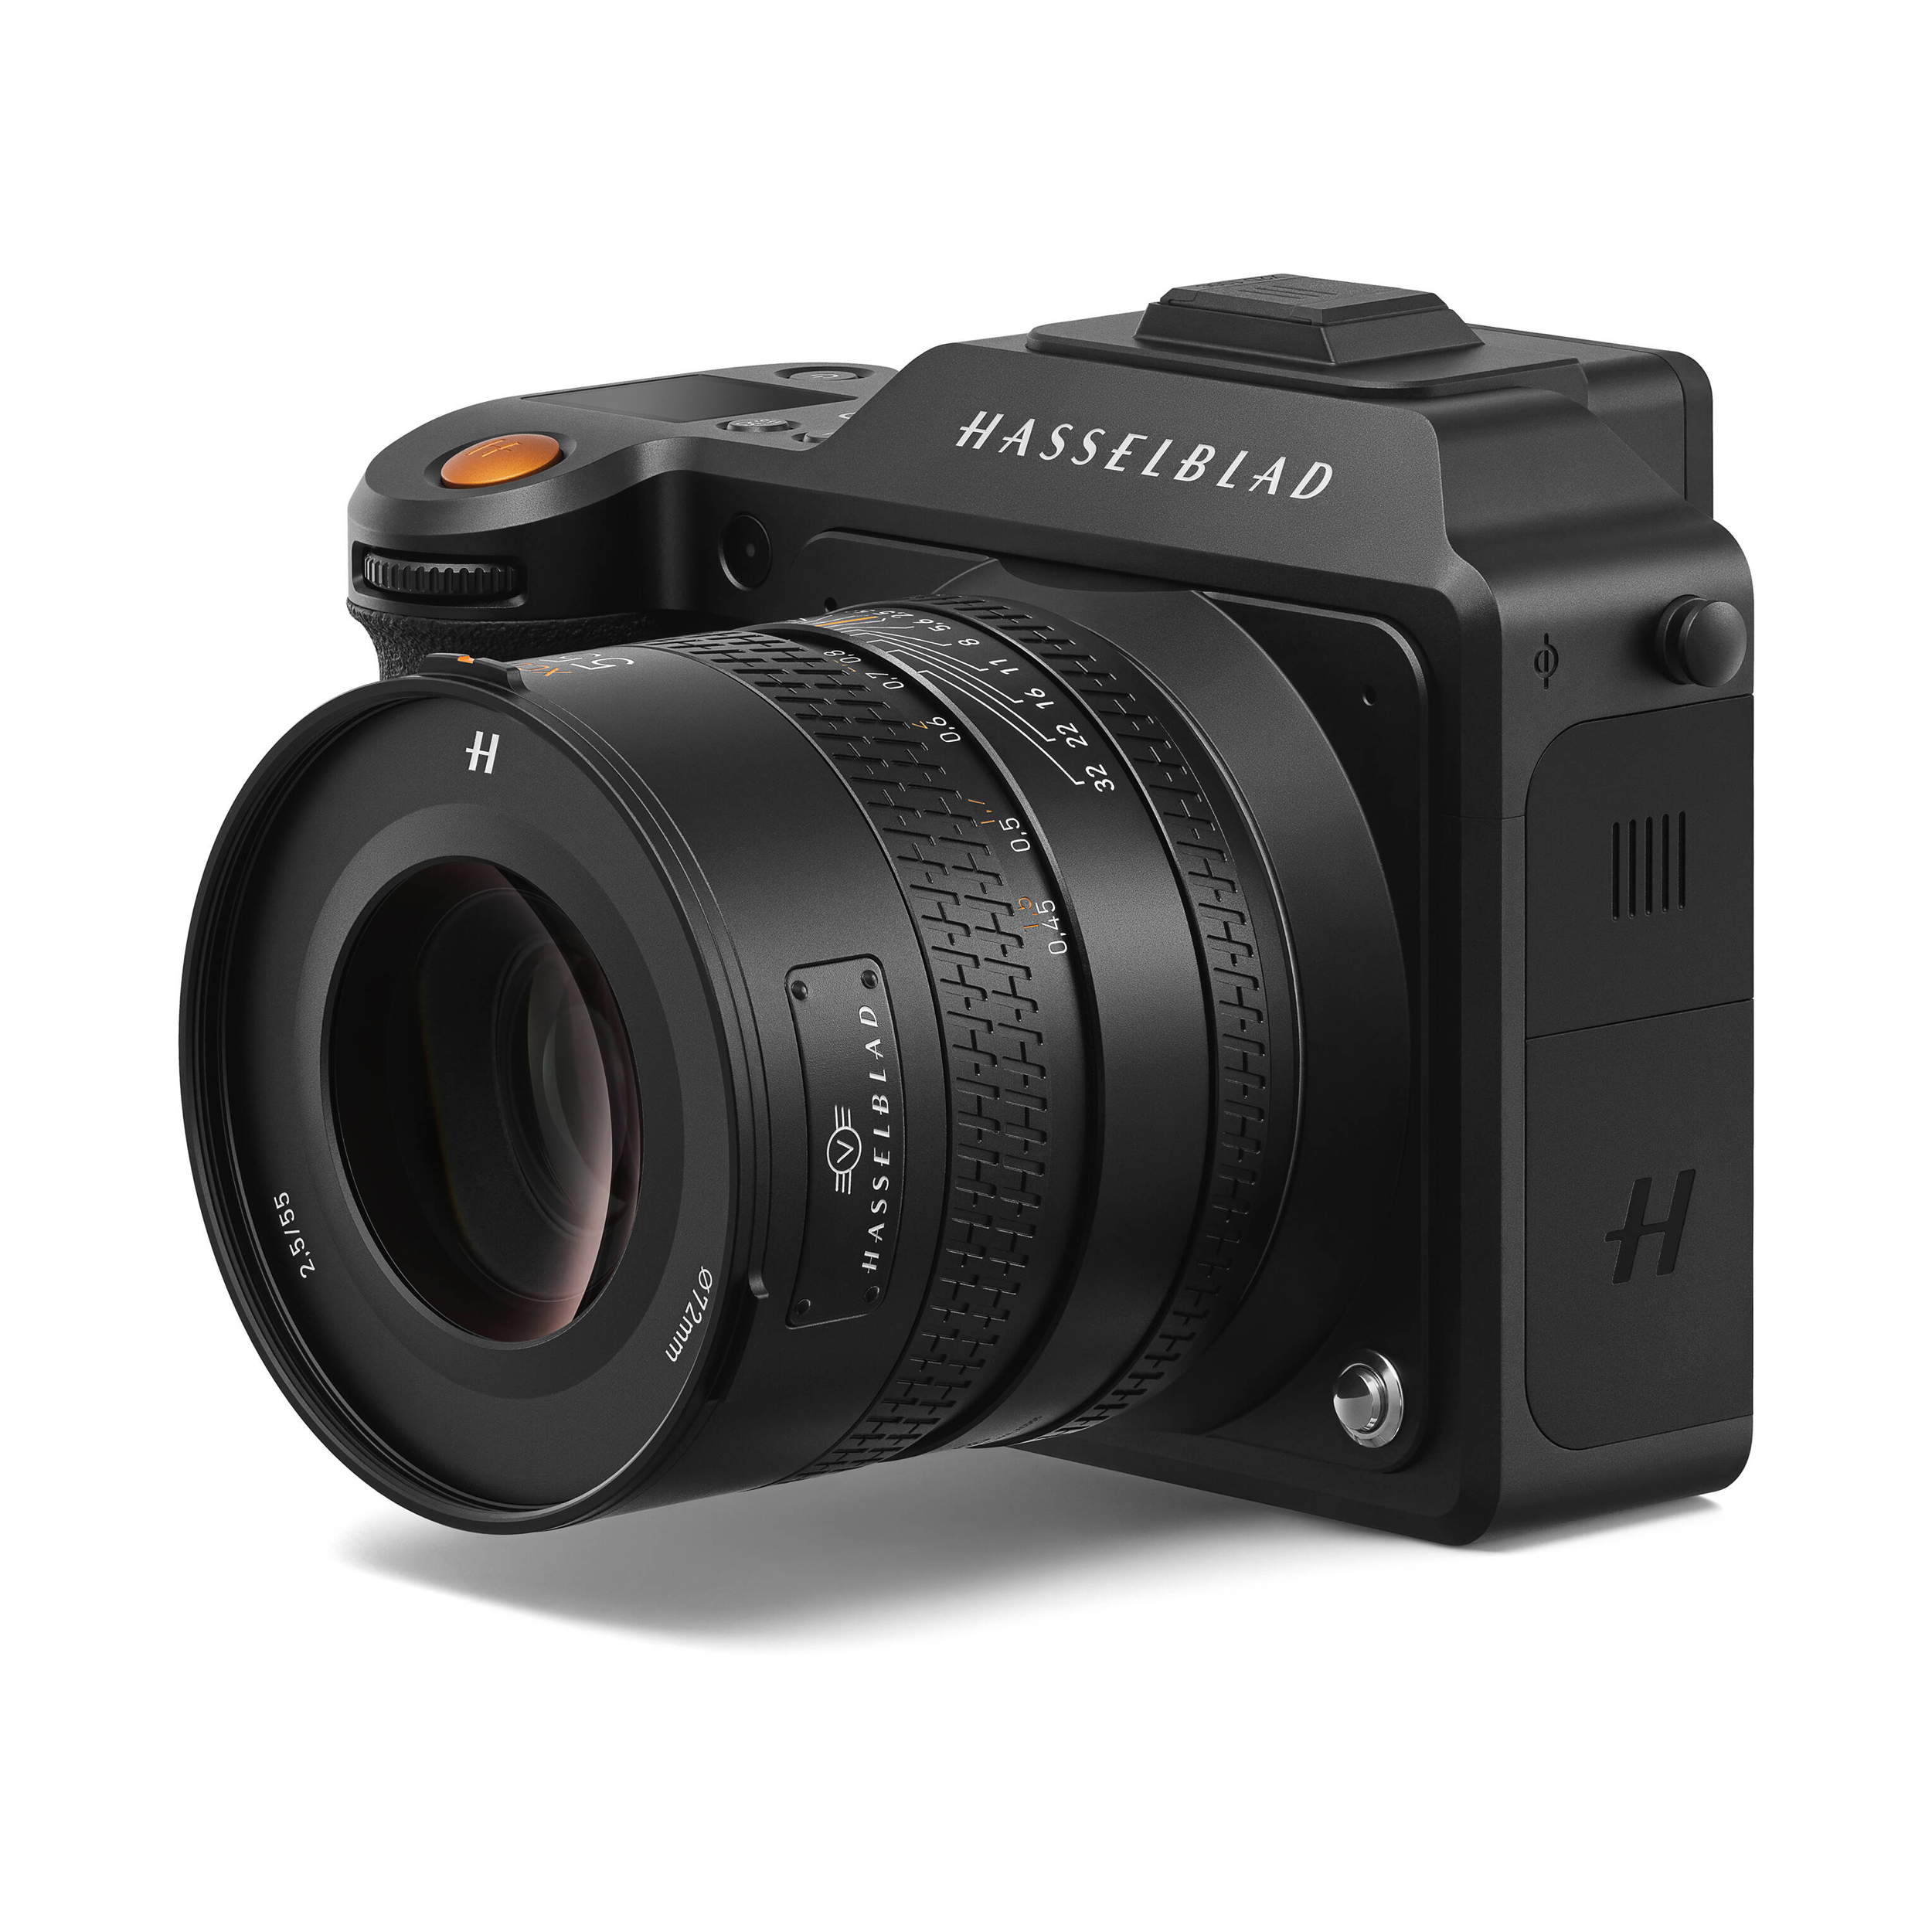 Hasselblad XCD 55 mm f / 2,5 V Lans